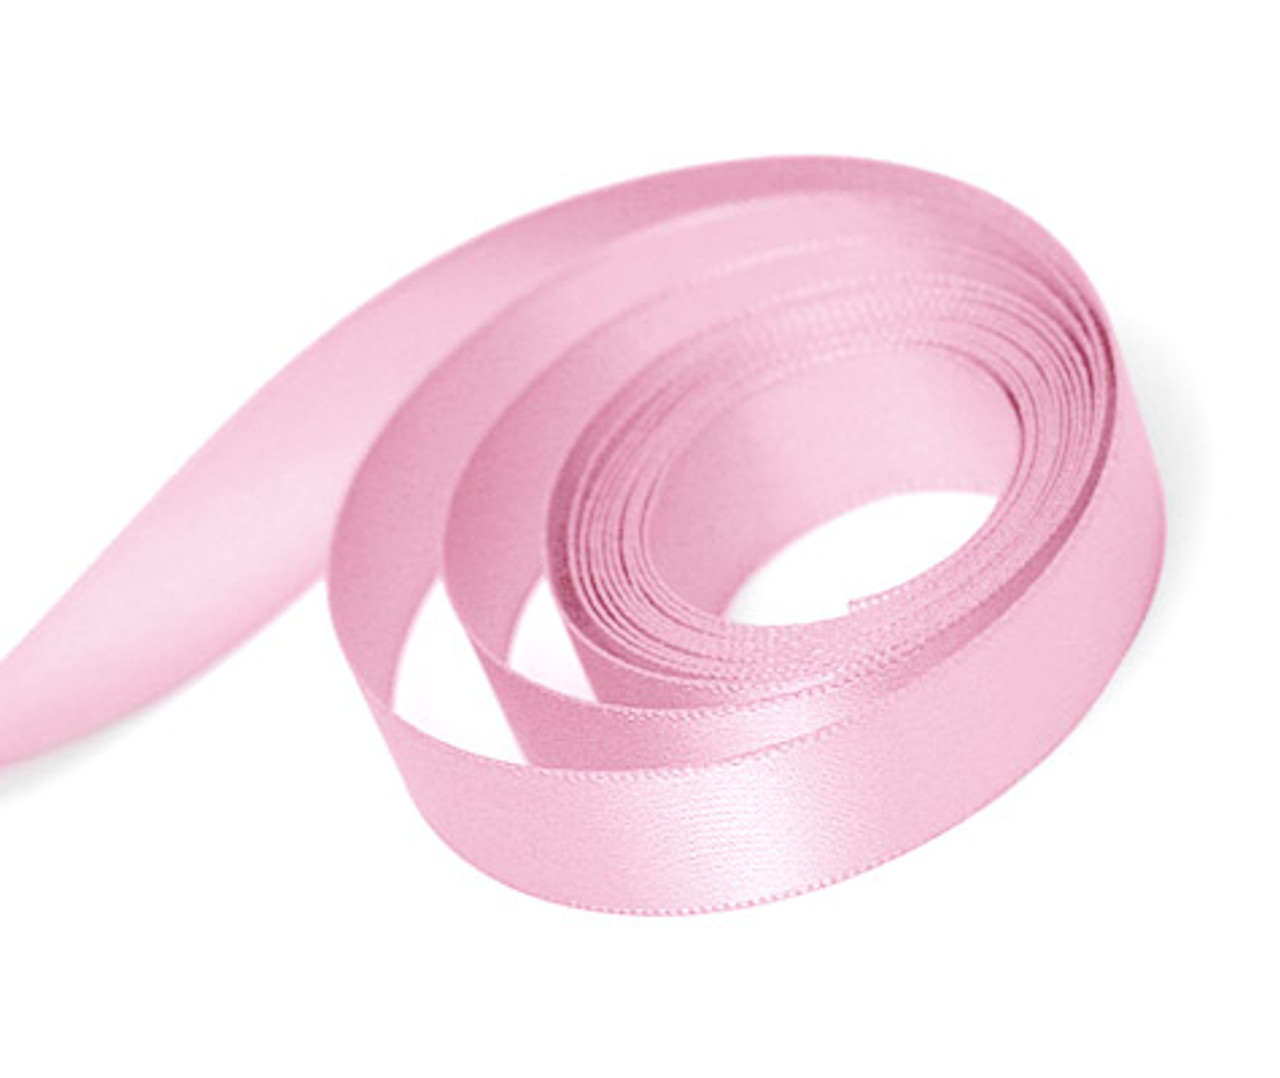 5/8" X 100yds Hot Deal Double Face Satin Ribbon Pink - ea.